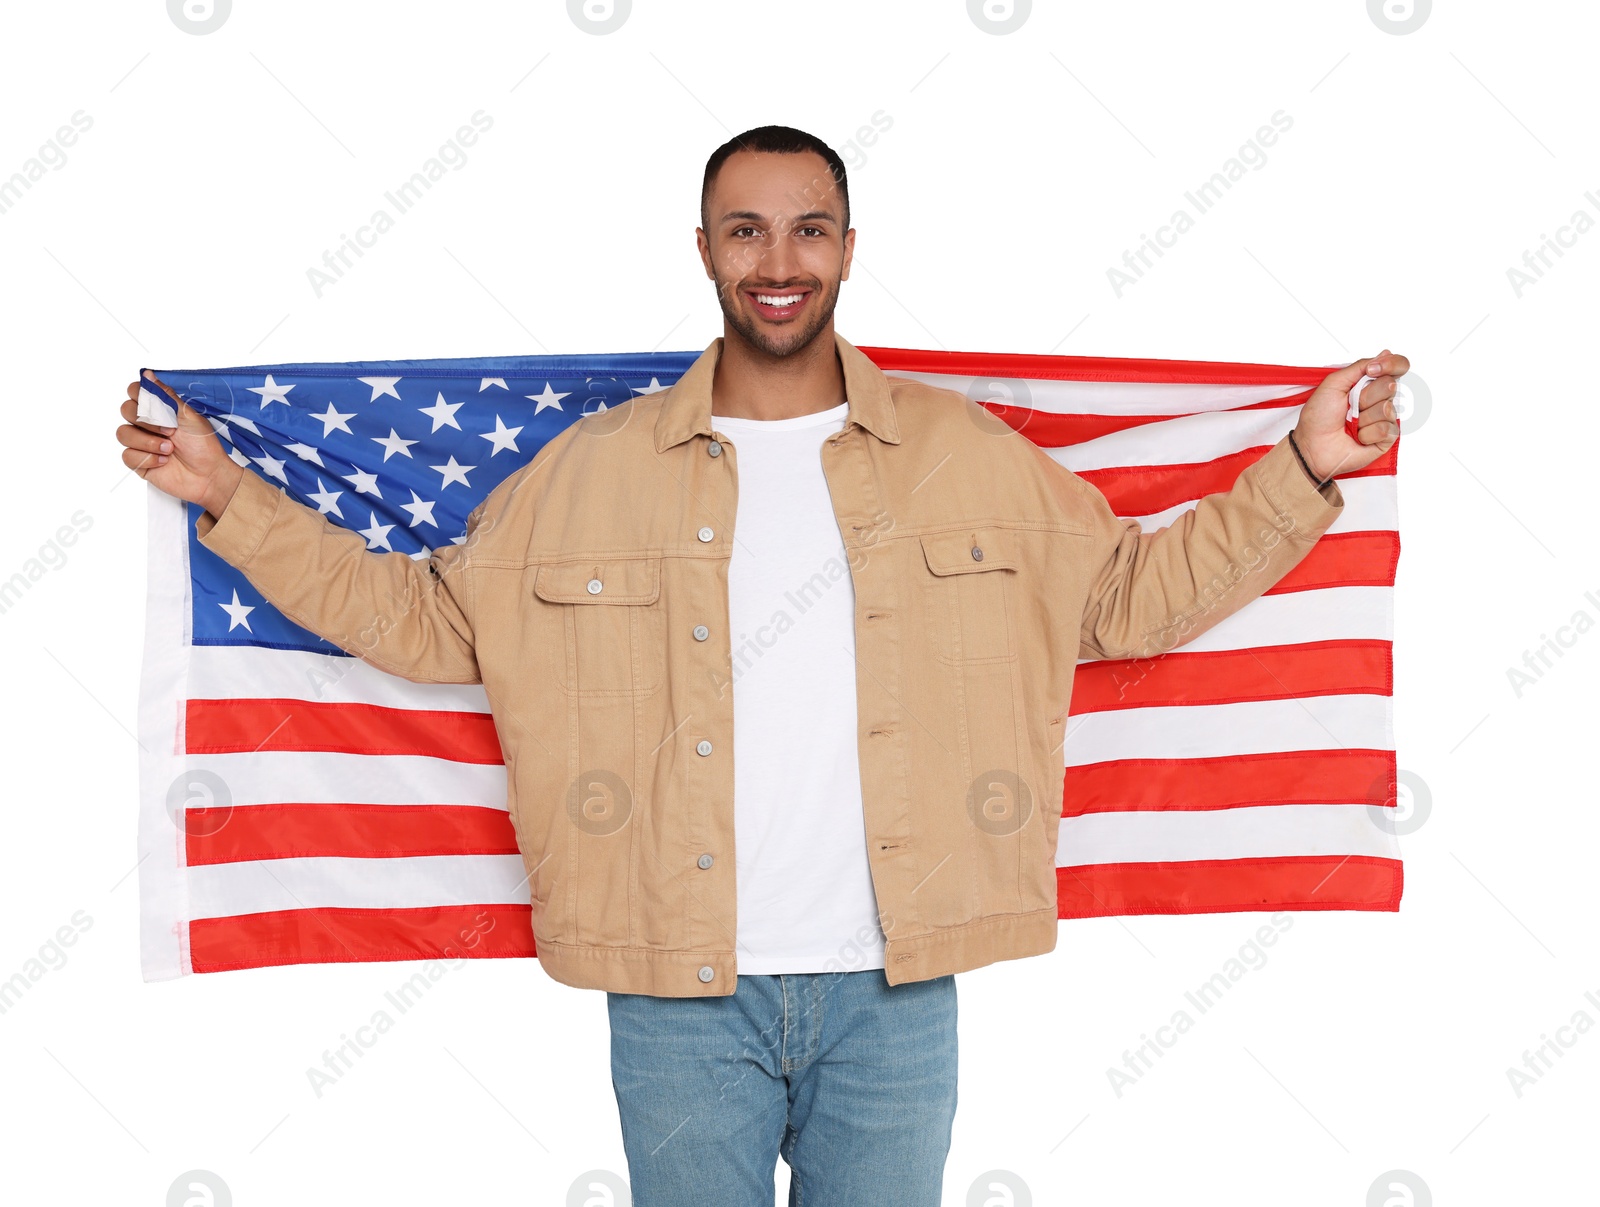 Image of 4th of July - Independence day of America. Happy man with national flag of United States on white background